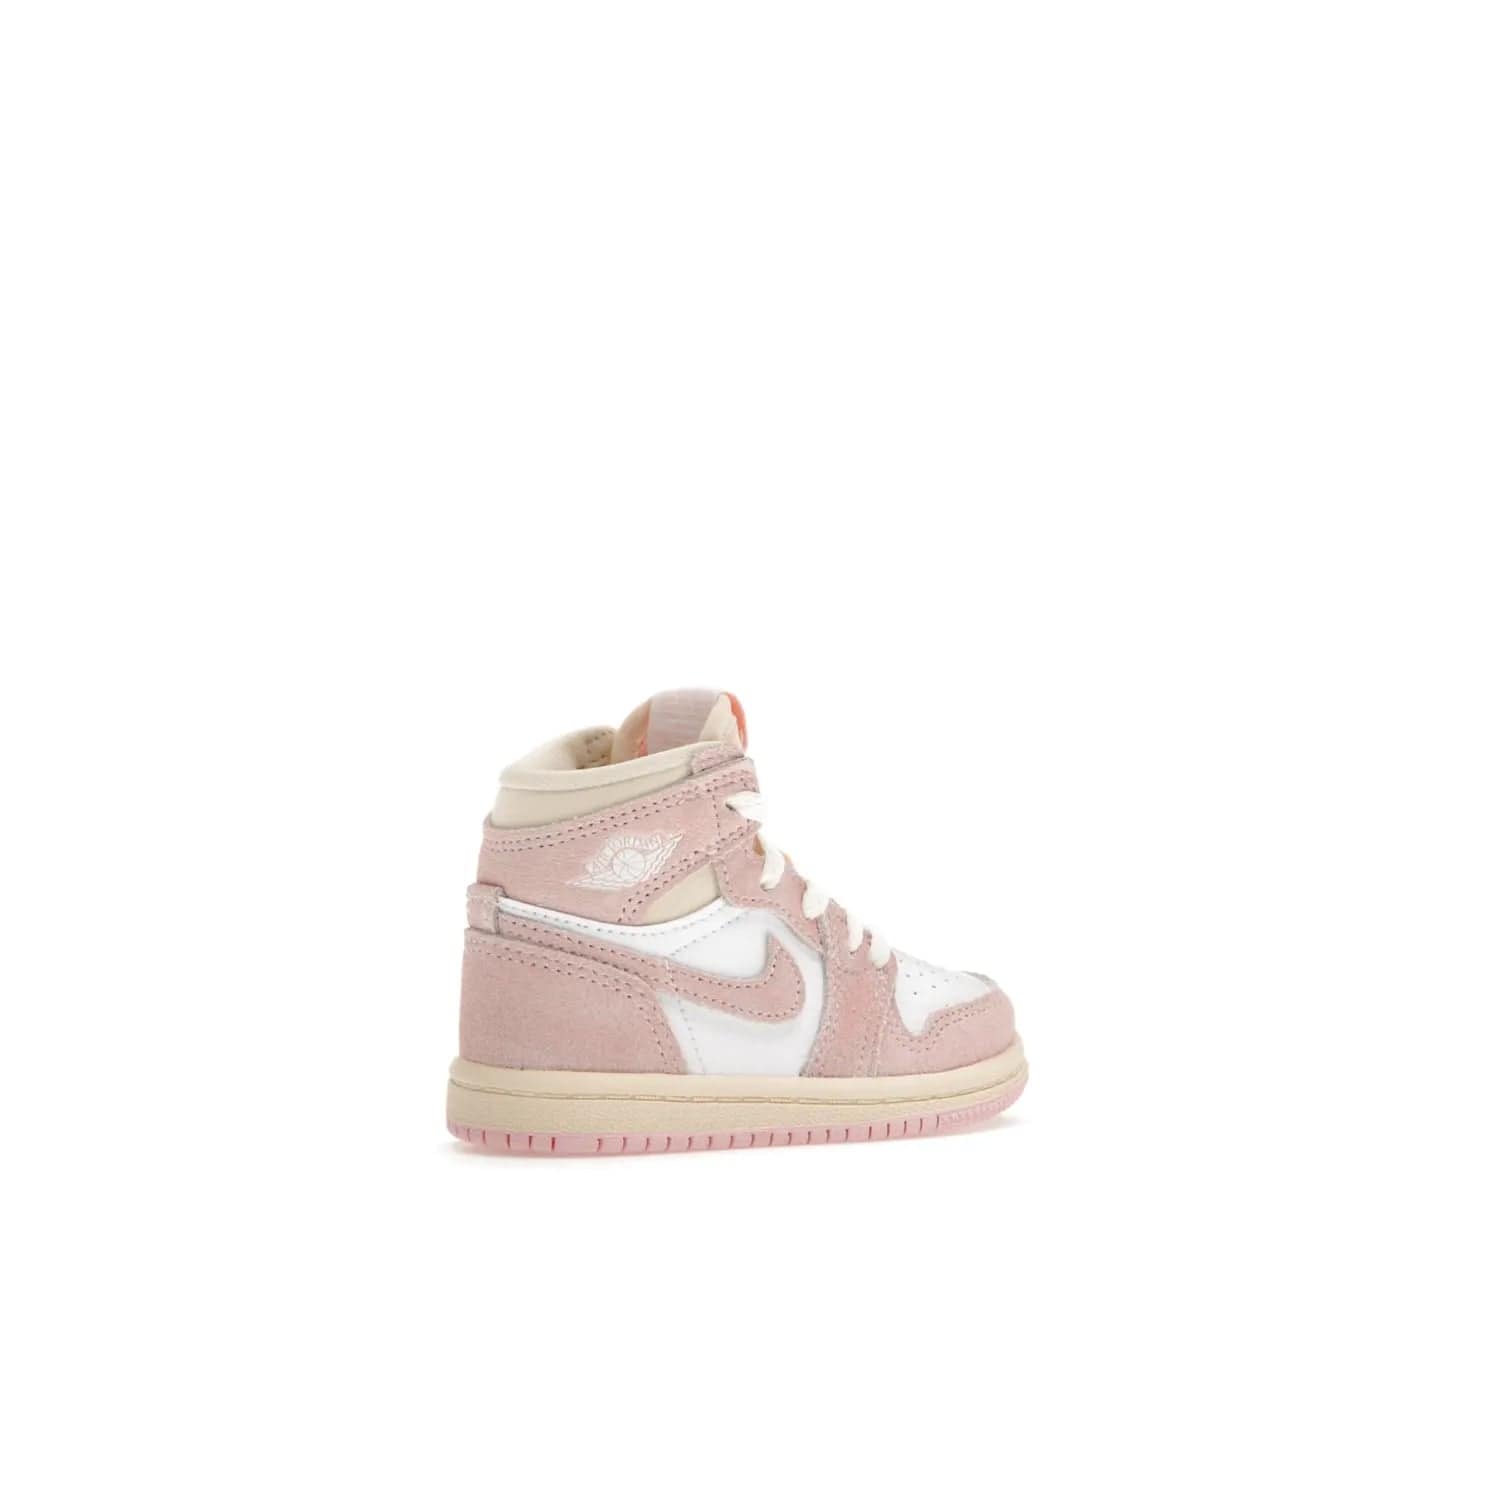 Jordan 1 Retro High OG Washed Pink (TD) - Image 34 - Only at www.BallersClubKickz.com - Retro style meets modern comfort: Introducing the Jordan 1 High OG Washed Pink (TD). Combining Atmosphere/White/Muslin/Sail colors with a high-rise silhouette, these shoes will be an instant classic when they release April 22, 2023.